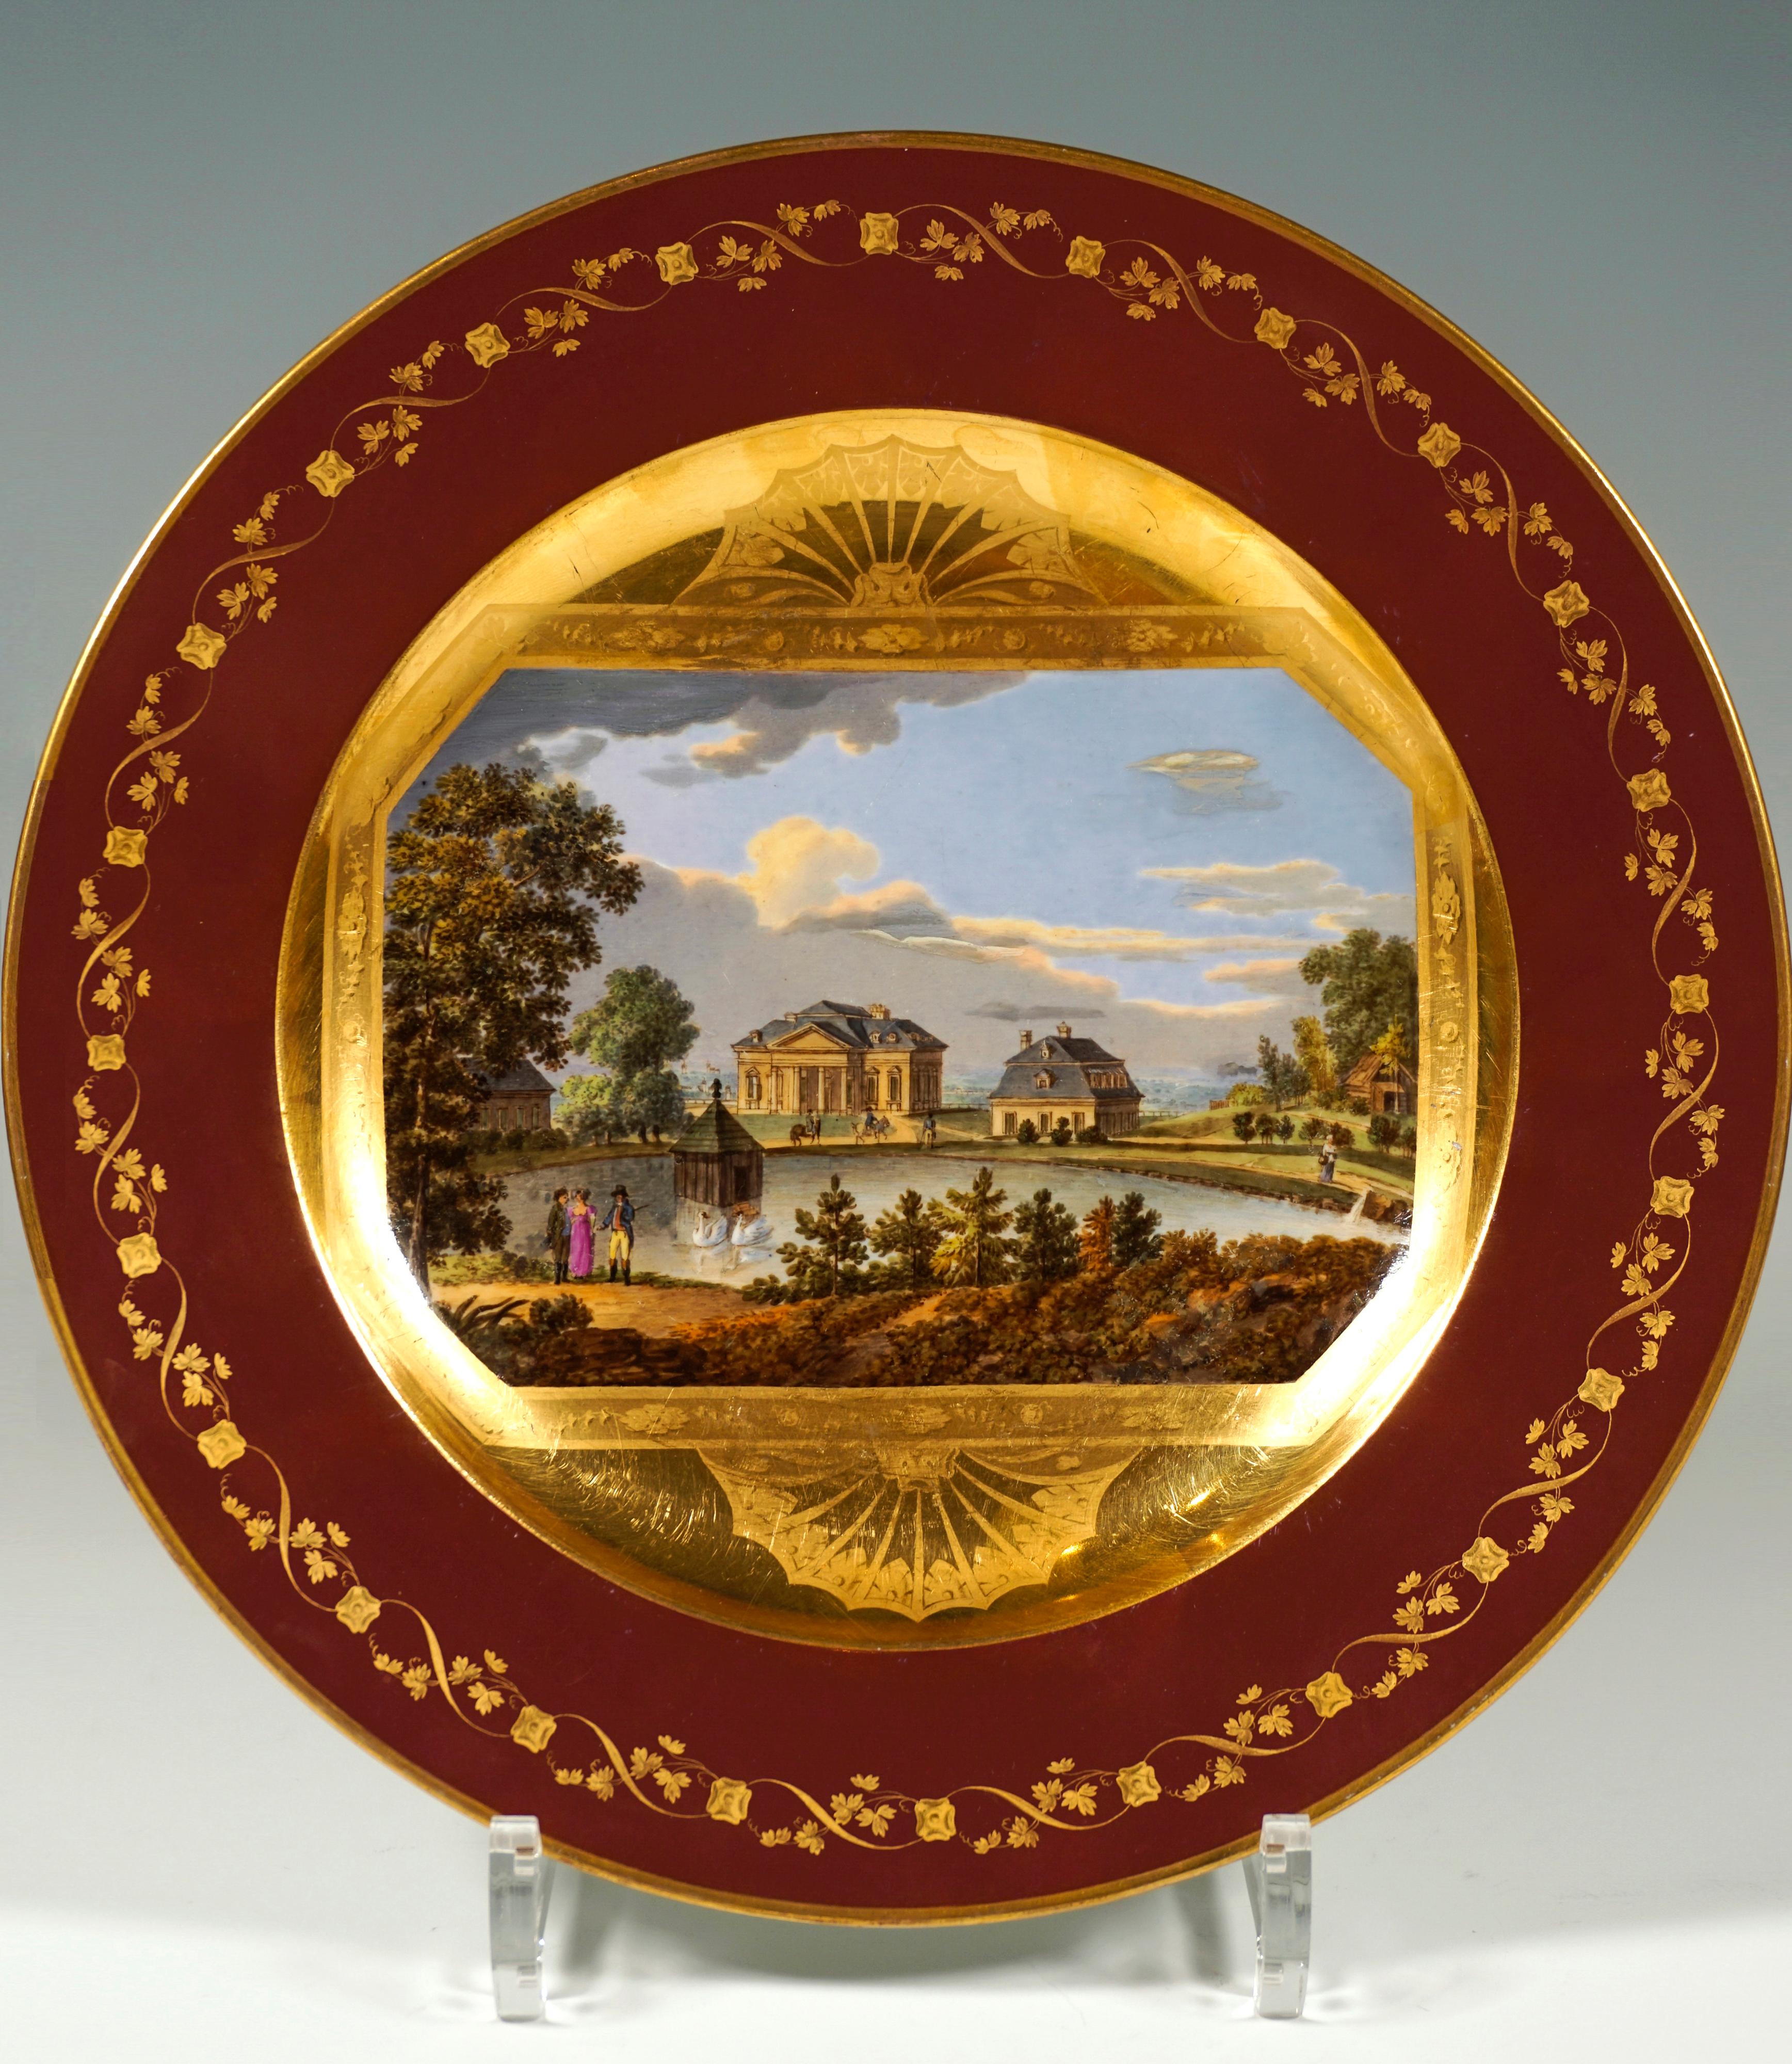 Porcelain plate decorated with fine veduta painting: In the mirror an octagonal picture panel in front of a golden background with a border of 
leafy vines painted in matt gold and fan medallions above and below the picture, depicting the castle of